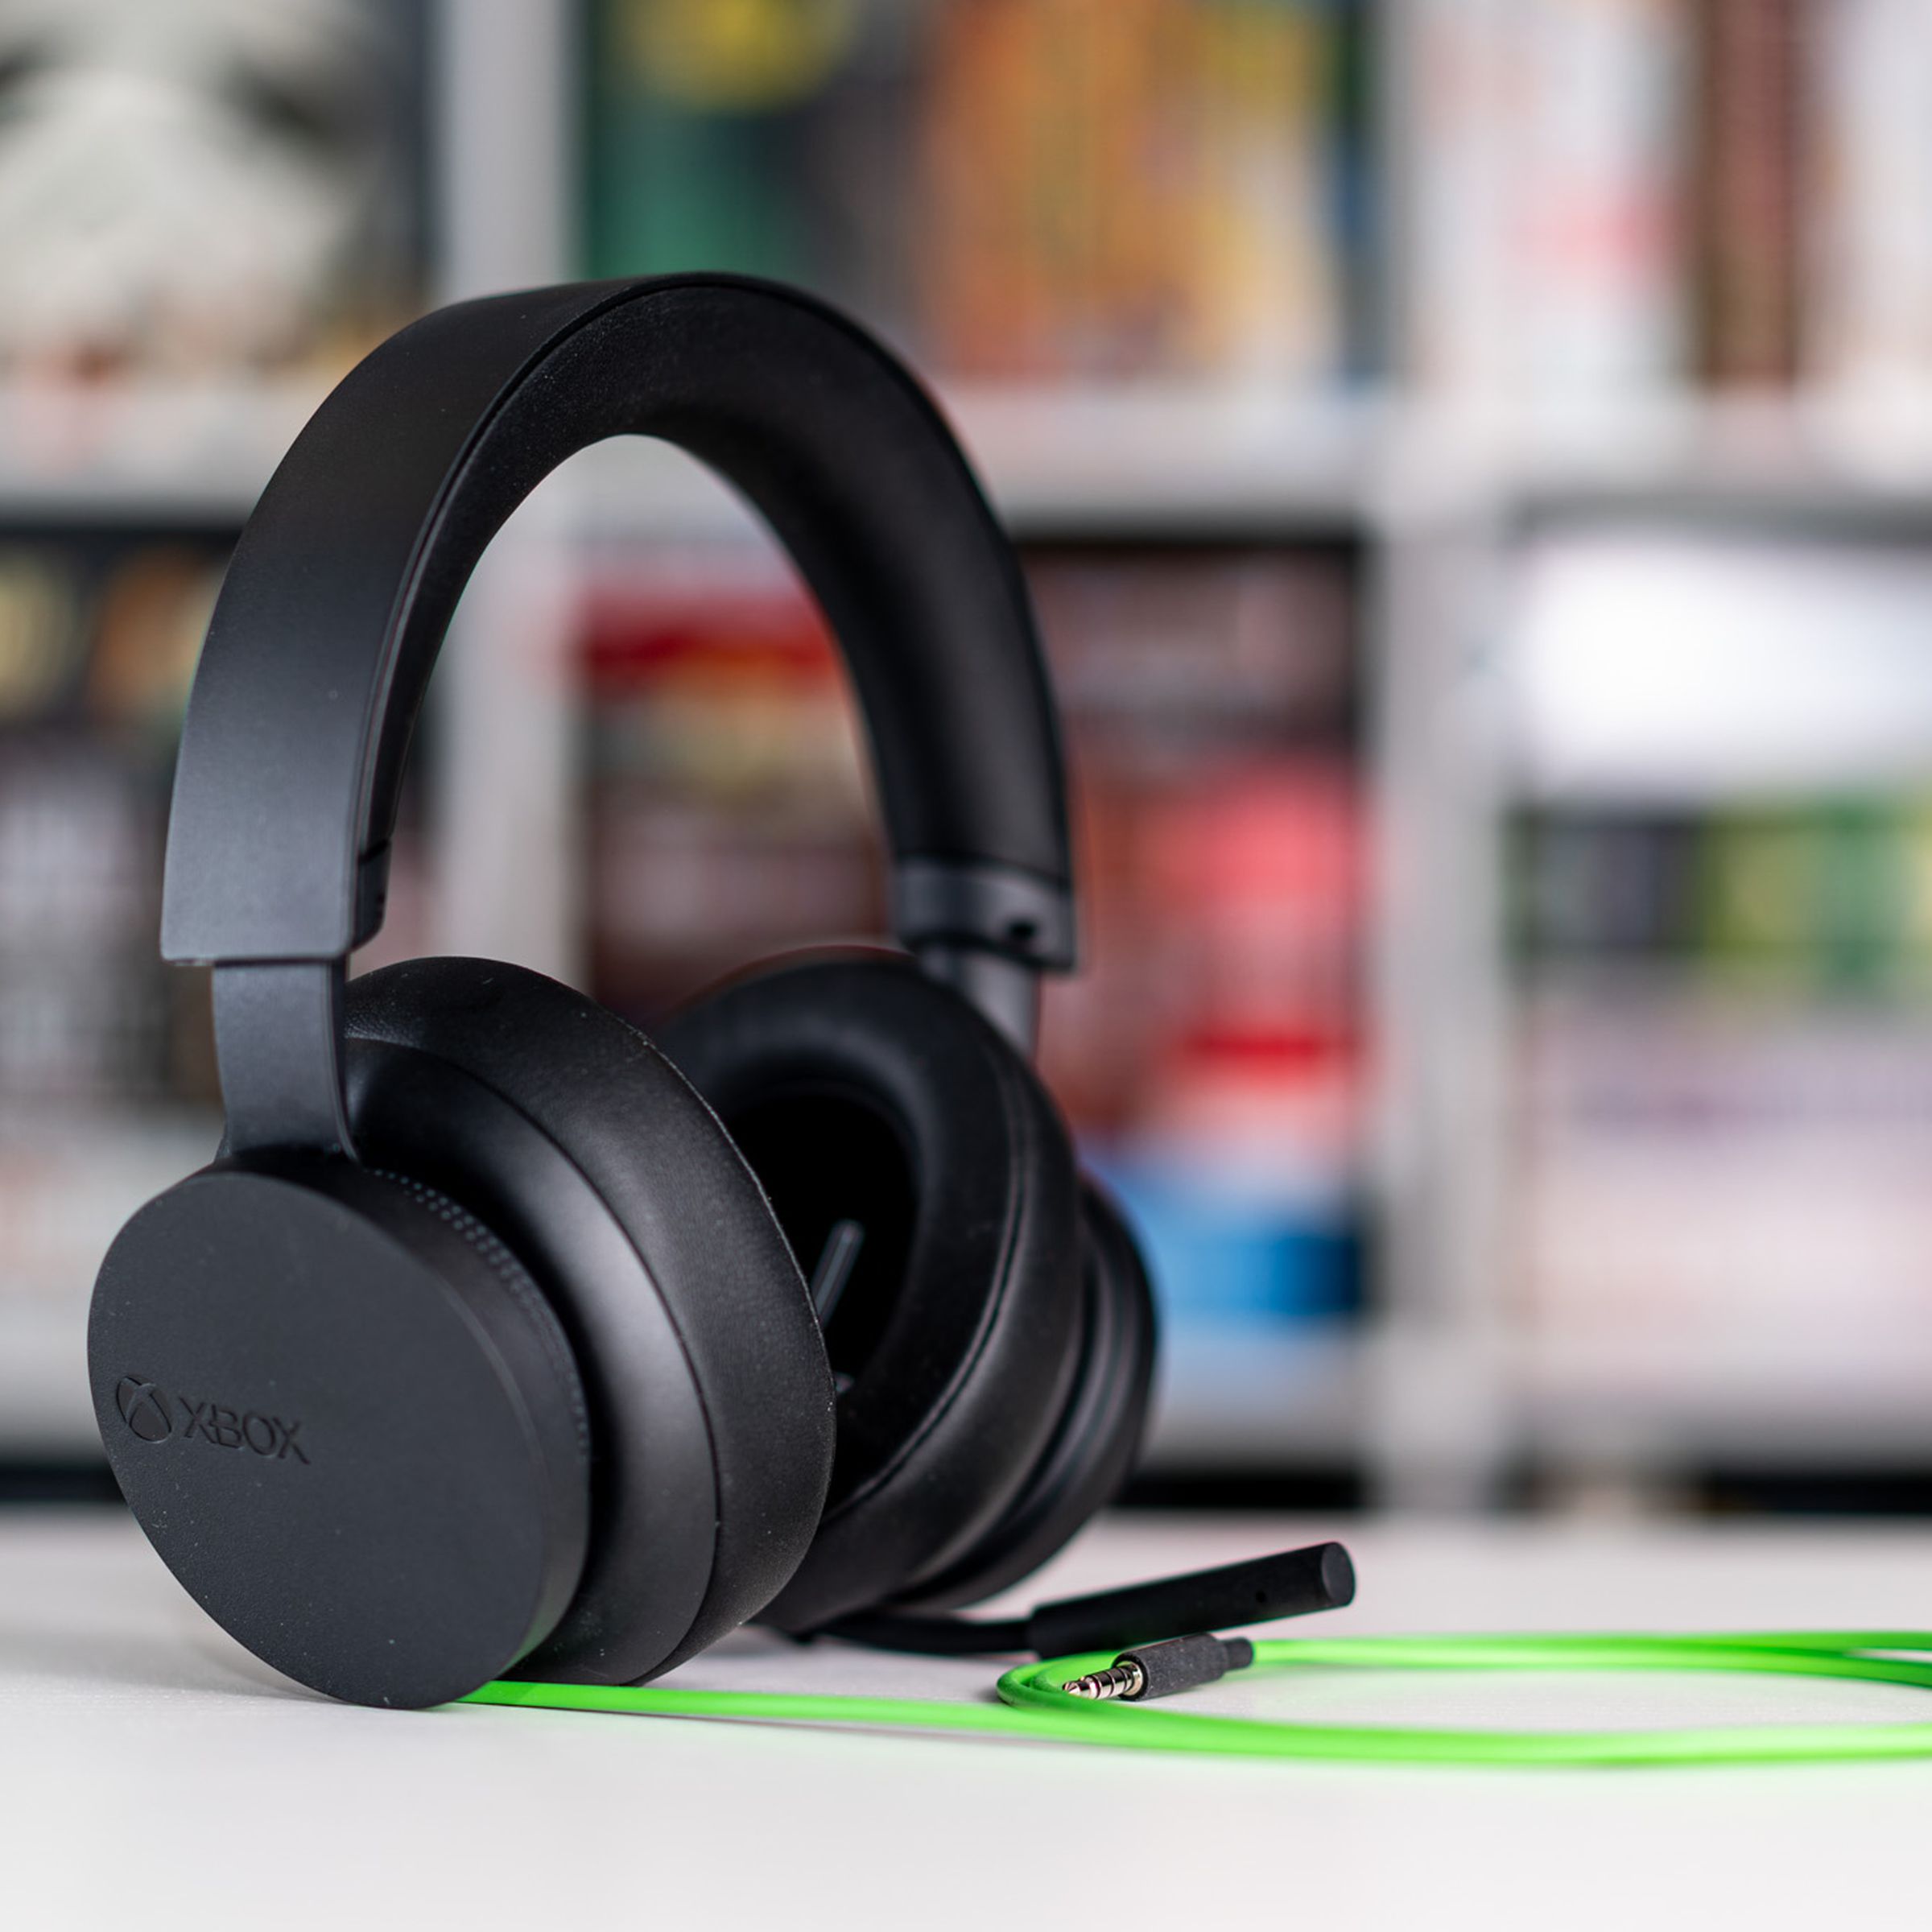 The Xbox Stereo Headset is Microsoft’s wired entry-level model for the Xbox Series X / S, but it works on much more.